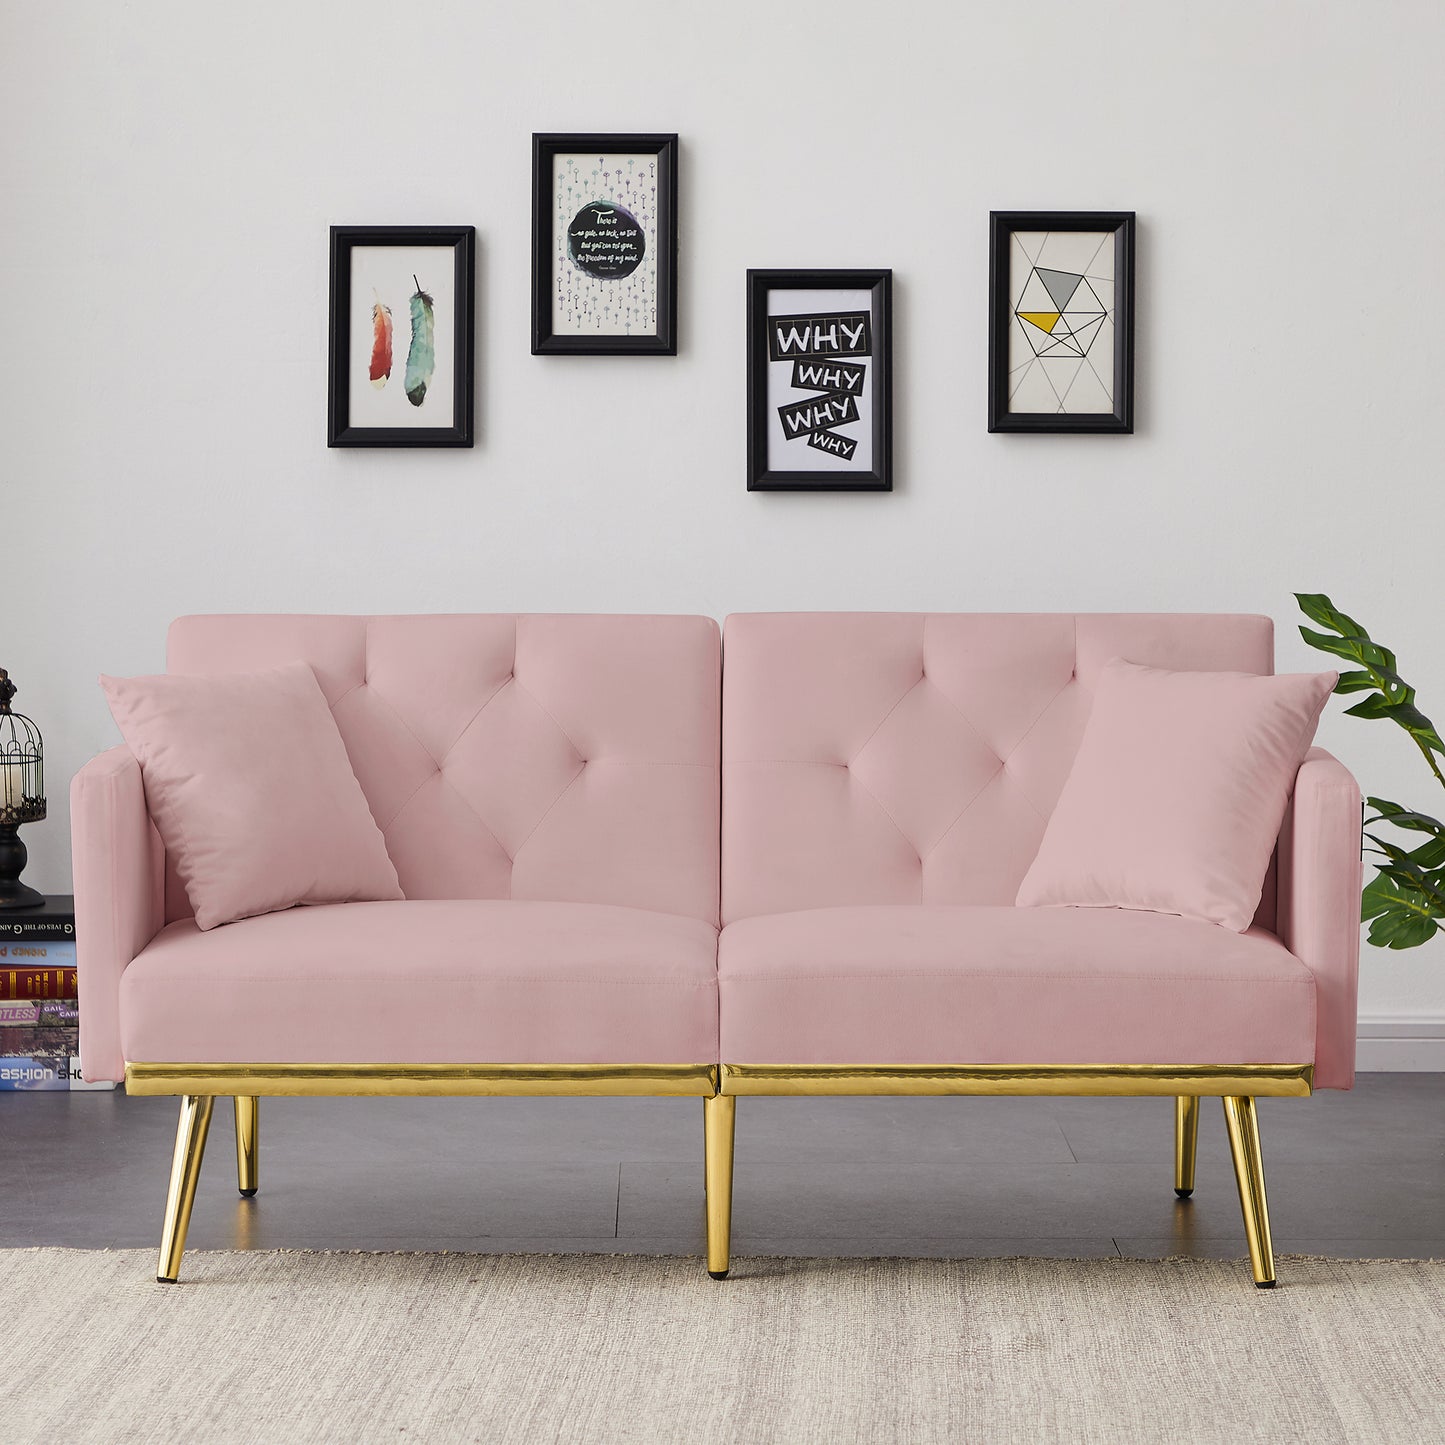 SYNGAR Couches for Living Room, Velvet Upholstered Convertible Sofa Bed with Armrests, Adjustable Backrest, Mid Century Futon Sofa and Couch for Home Apartment Dorm Living Room, Beige